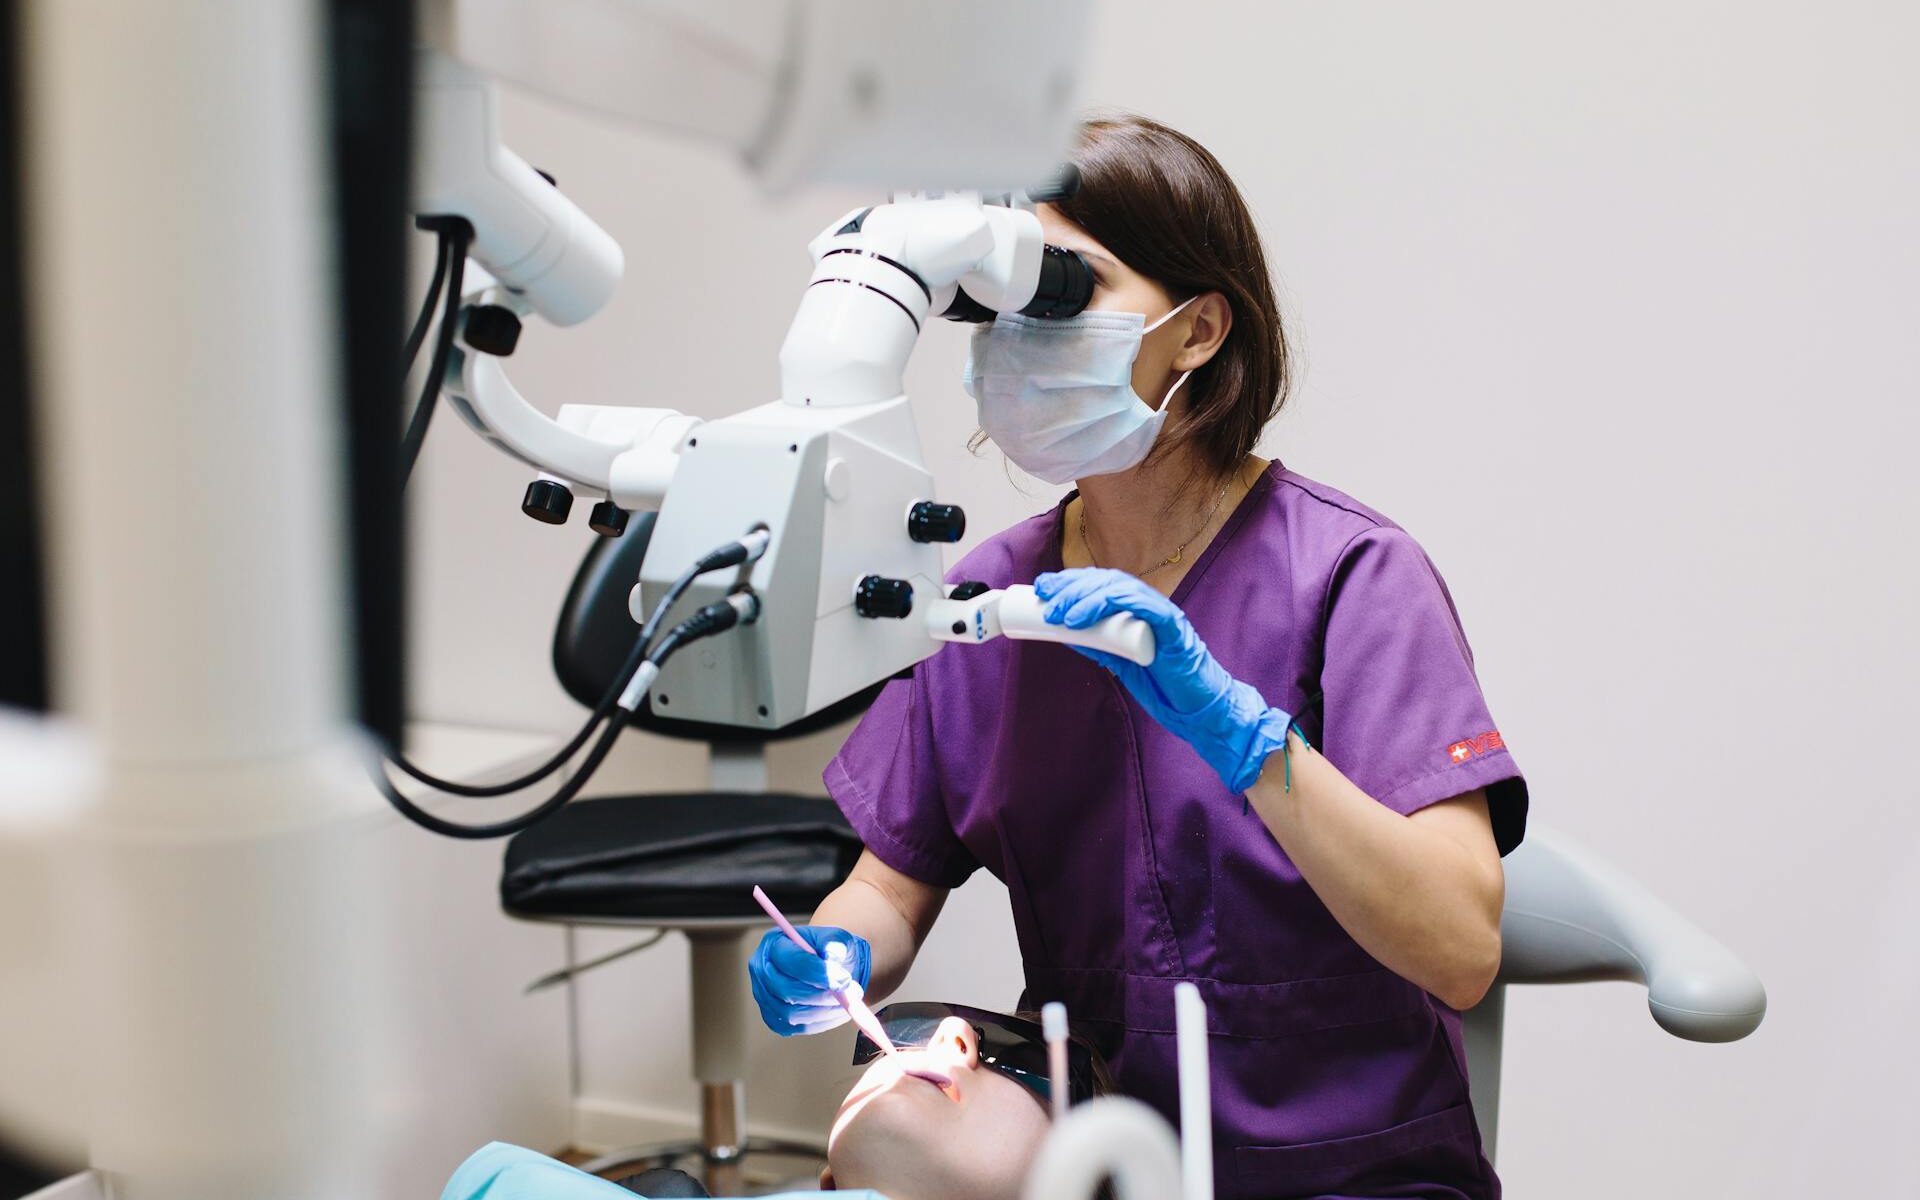 What Is the Dental Operative Microscope? What Impact Has It Had on Dentistry?